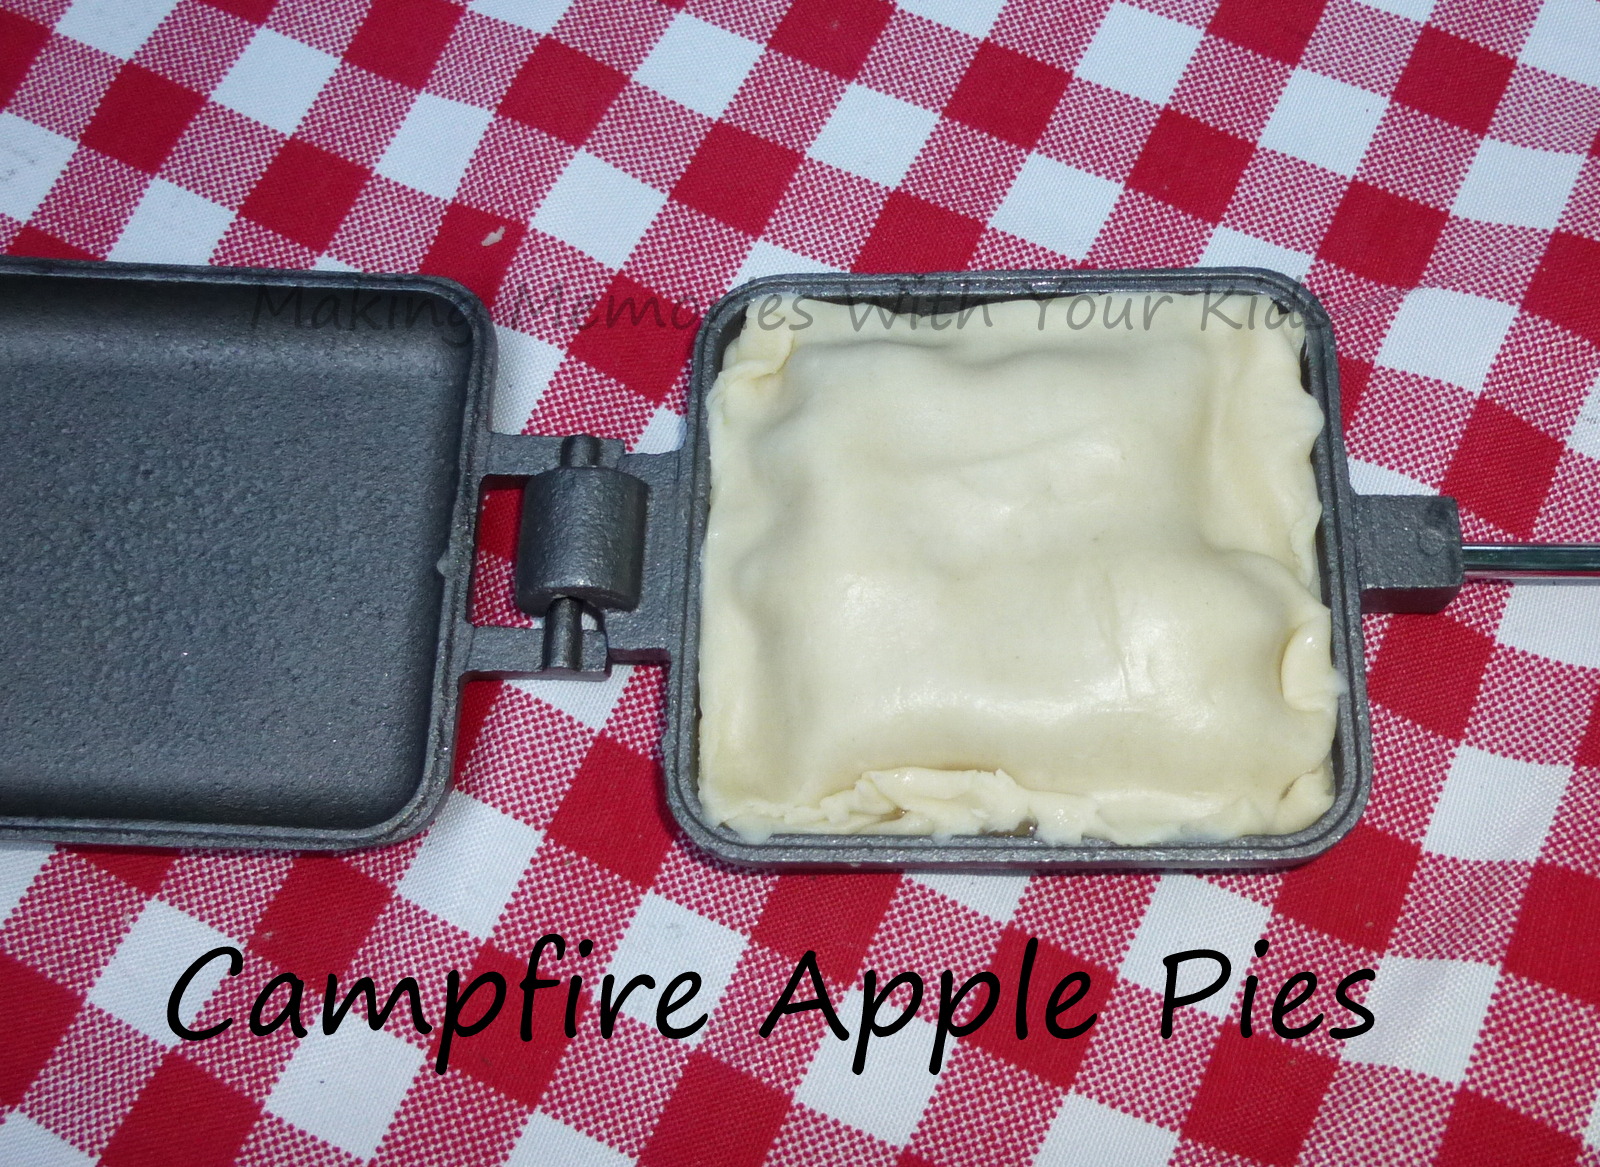 How to Make Pie Iron Apple Pies Over the Campfire - Life Love Larson